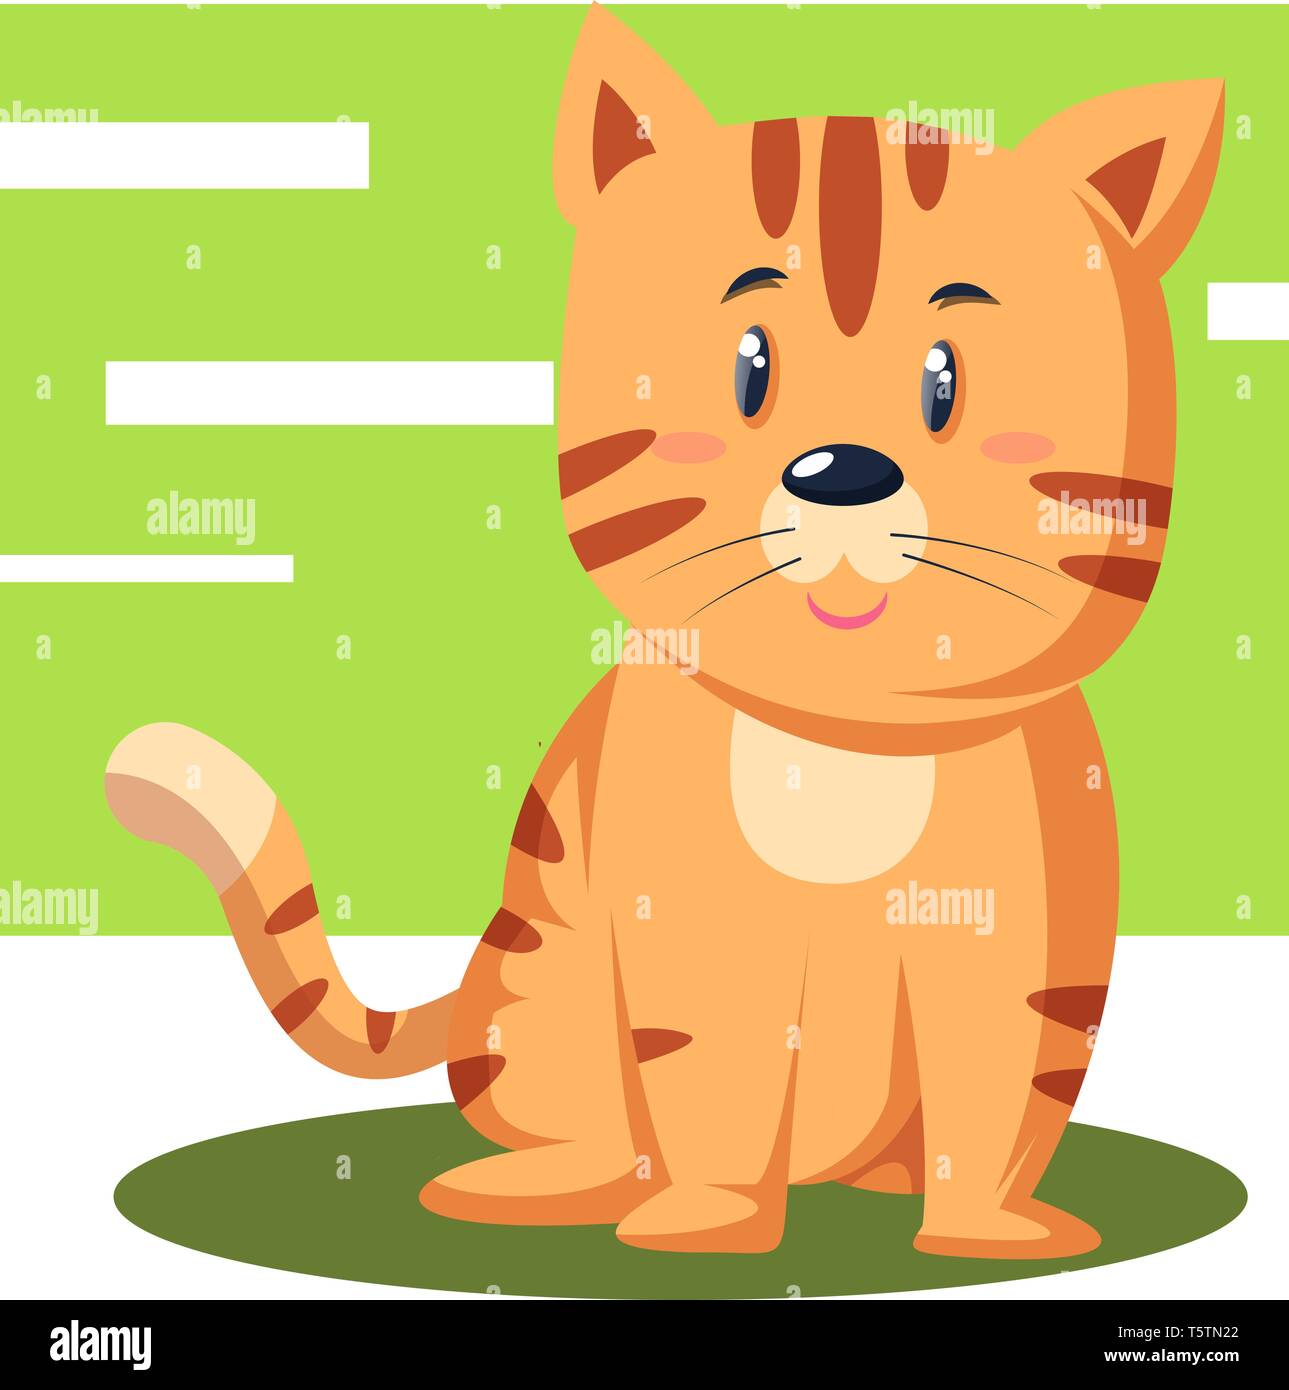 A Small orange tiger sitting on grass in green background, vector, color drawing or illustration. Stock Vector